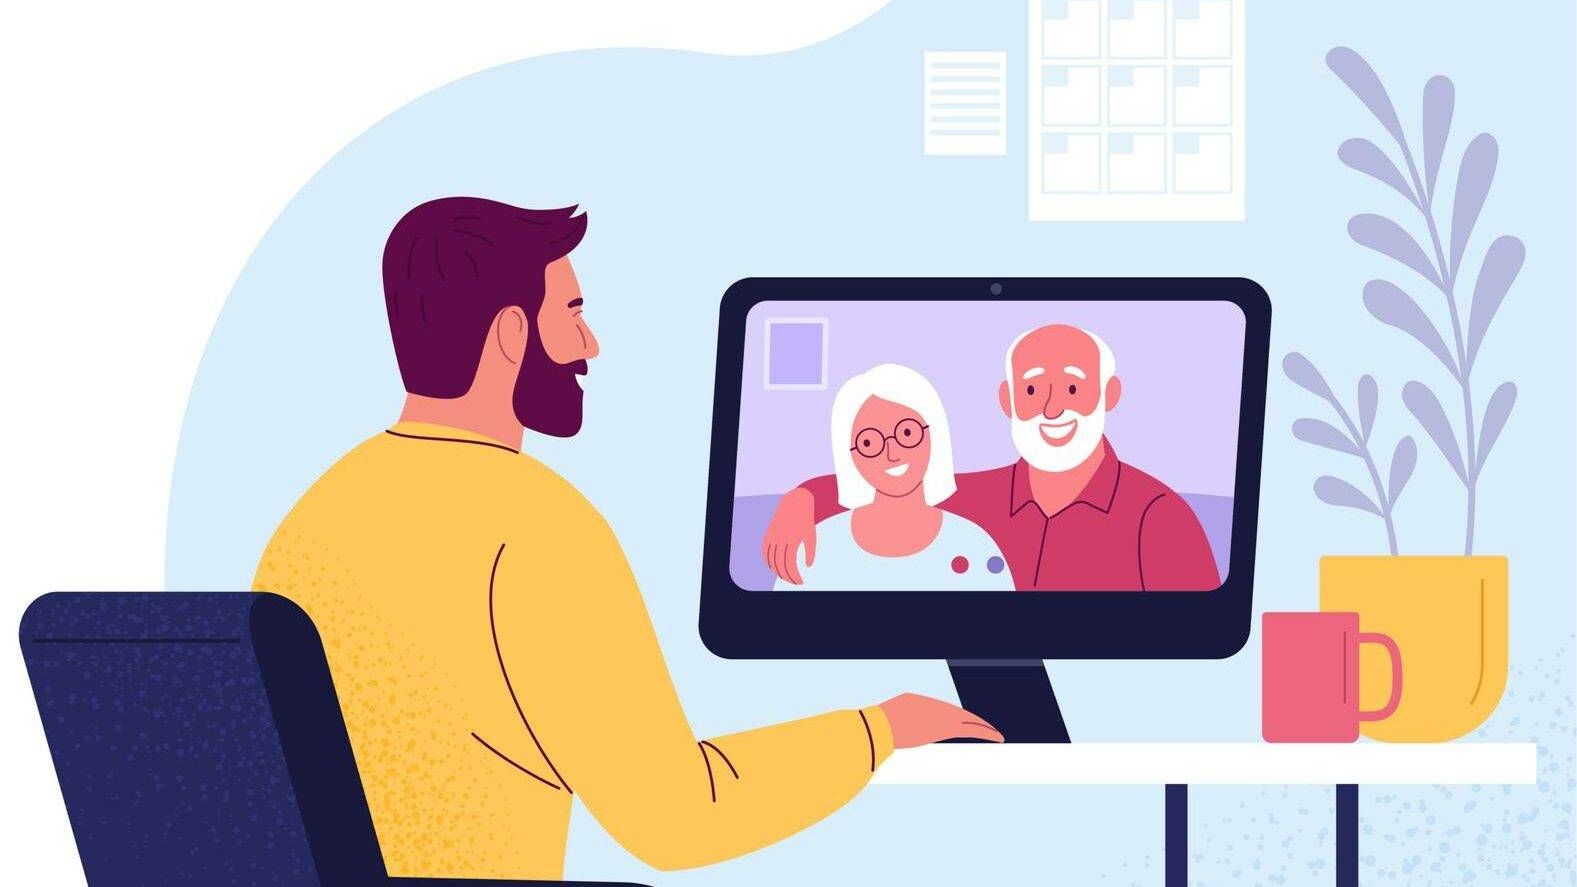 Illustration of a man having a video conference call with his parents, who appear together on a computer screen, rewire, aging